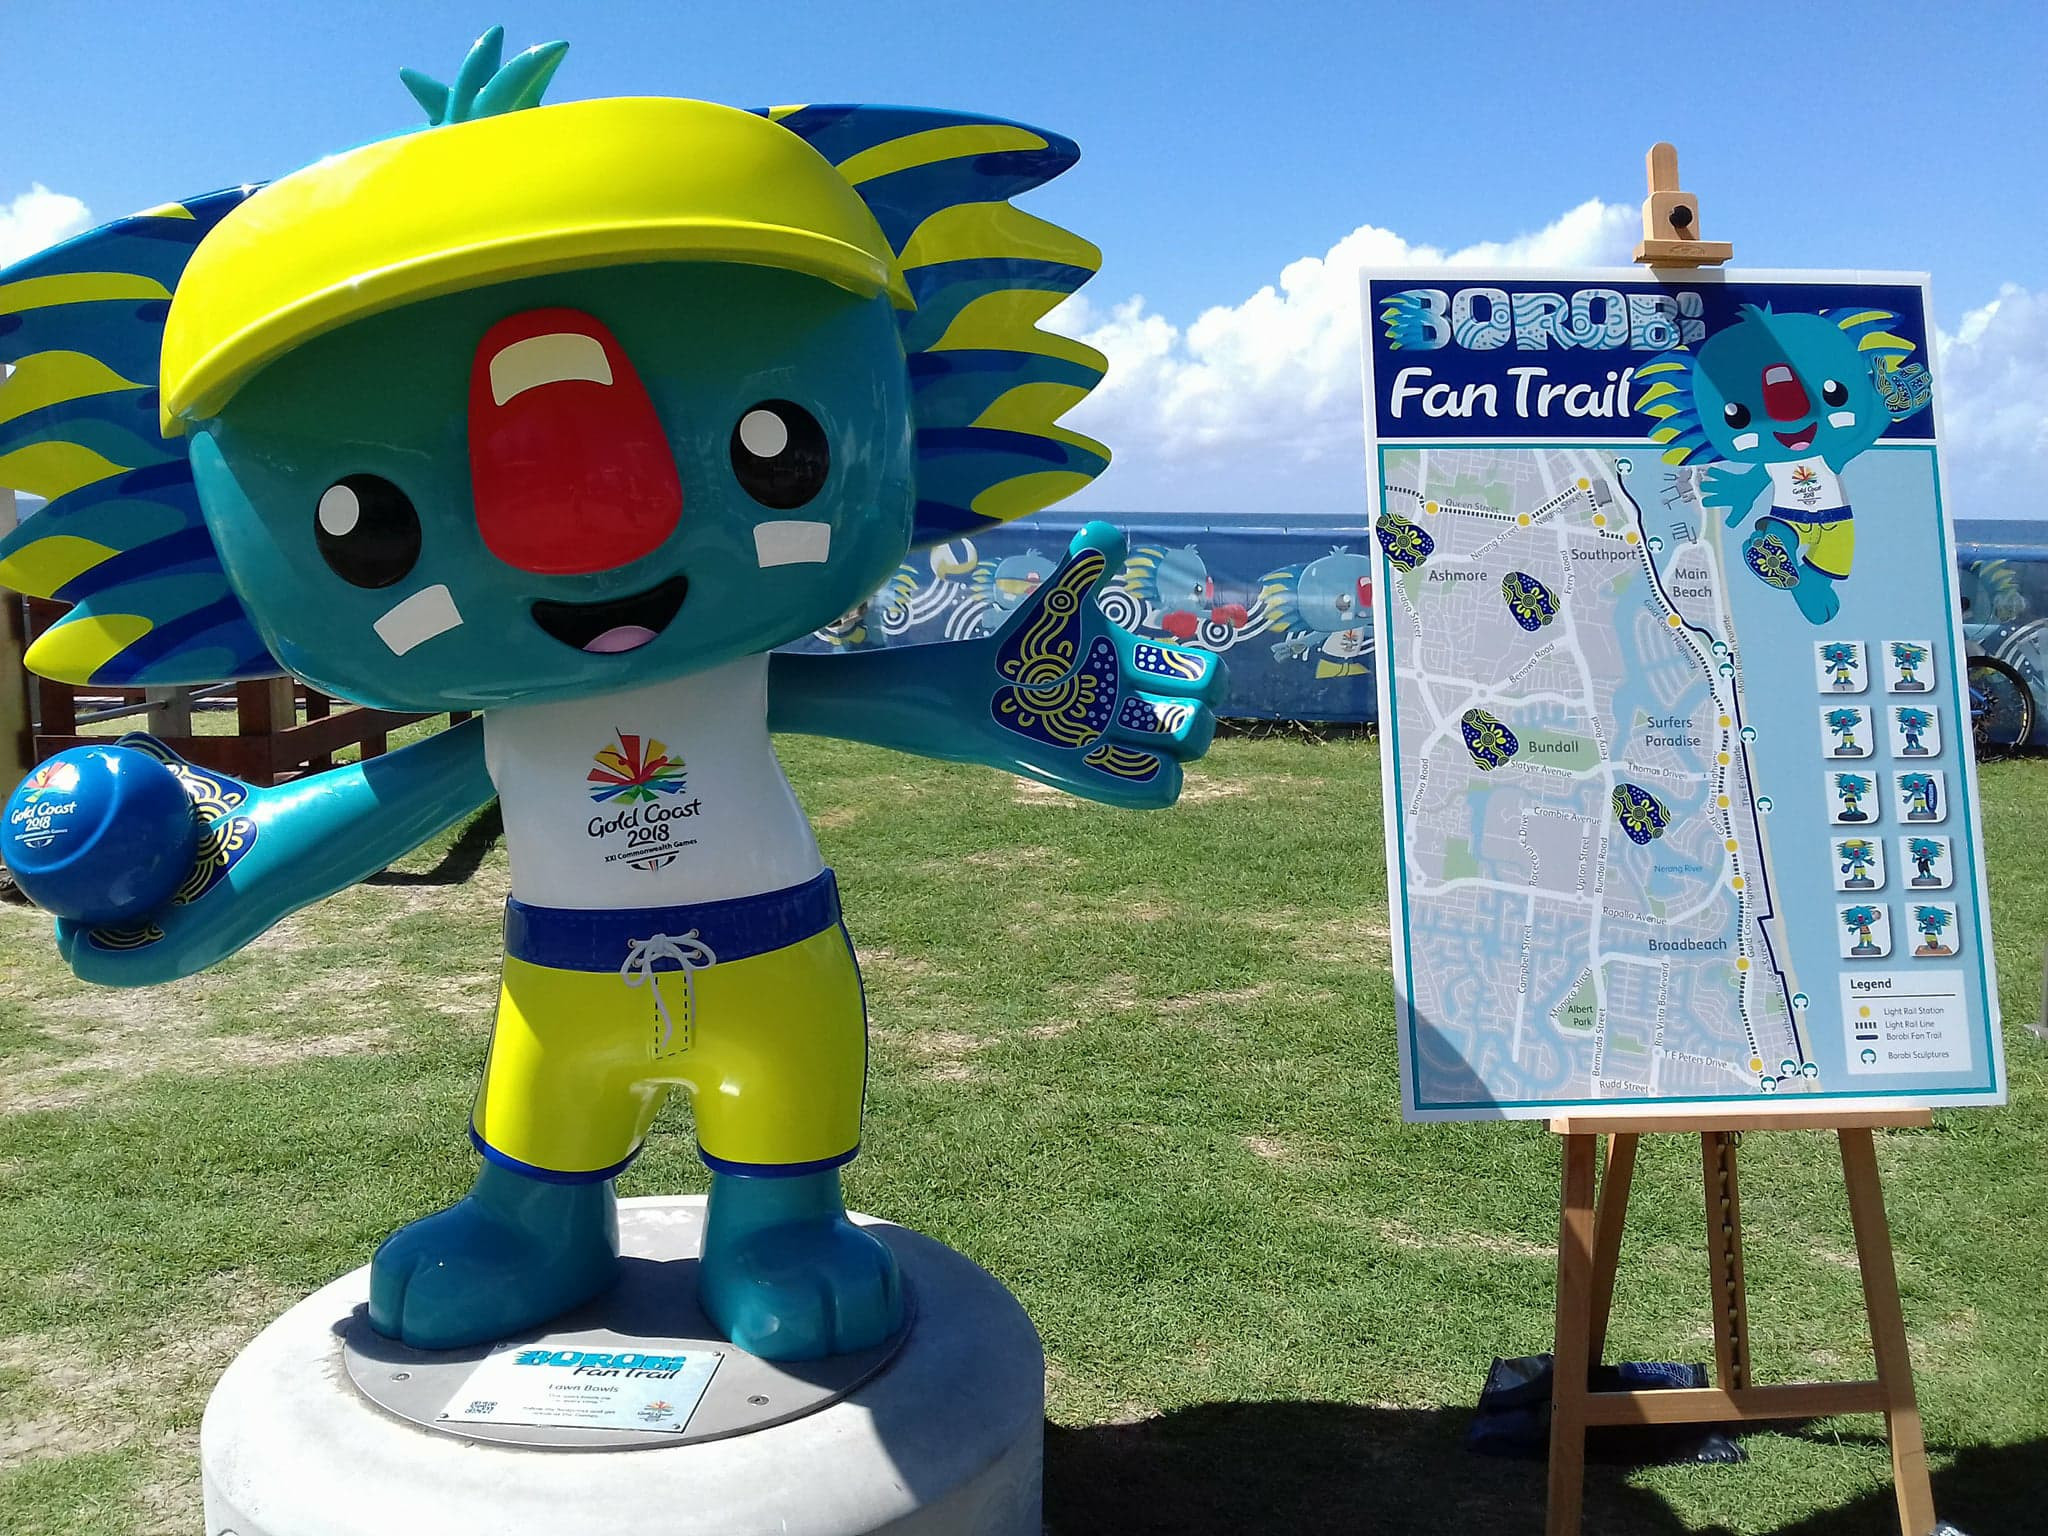 Gold Coast 2018 launch interactive mascot fan trail with prizes on offer